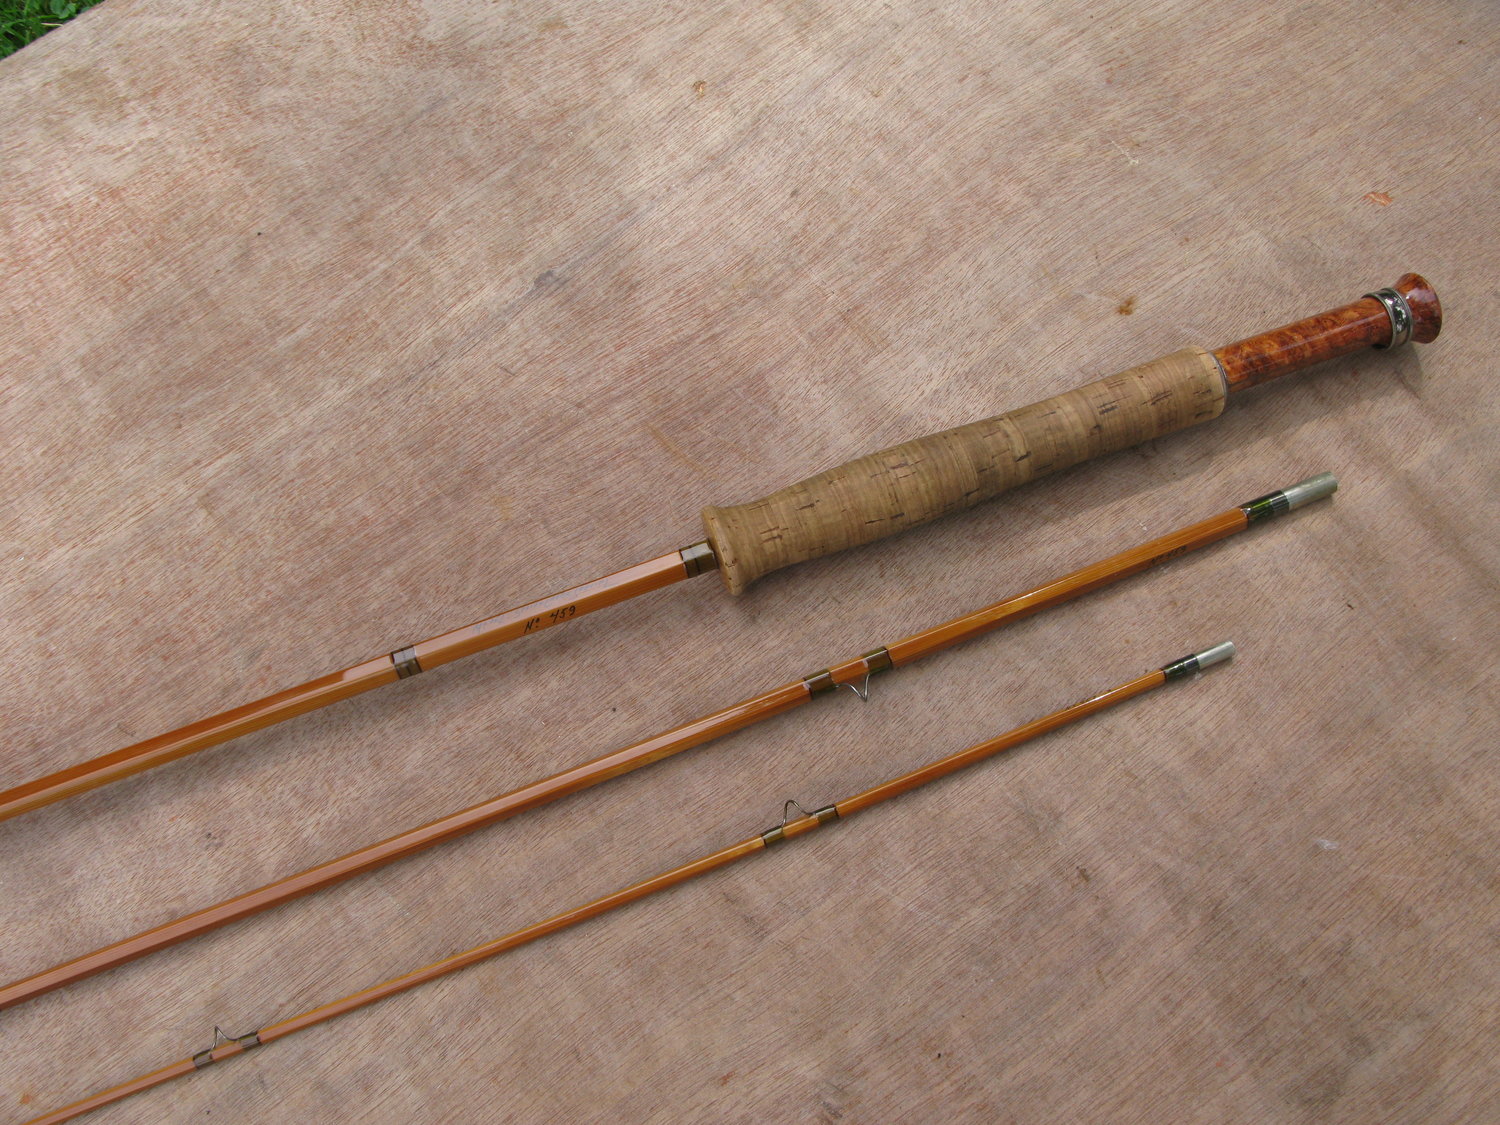 Portions of a beautifully crafted Raine bamboo fly rod.